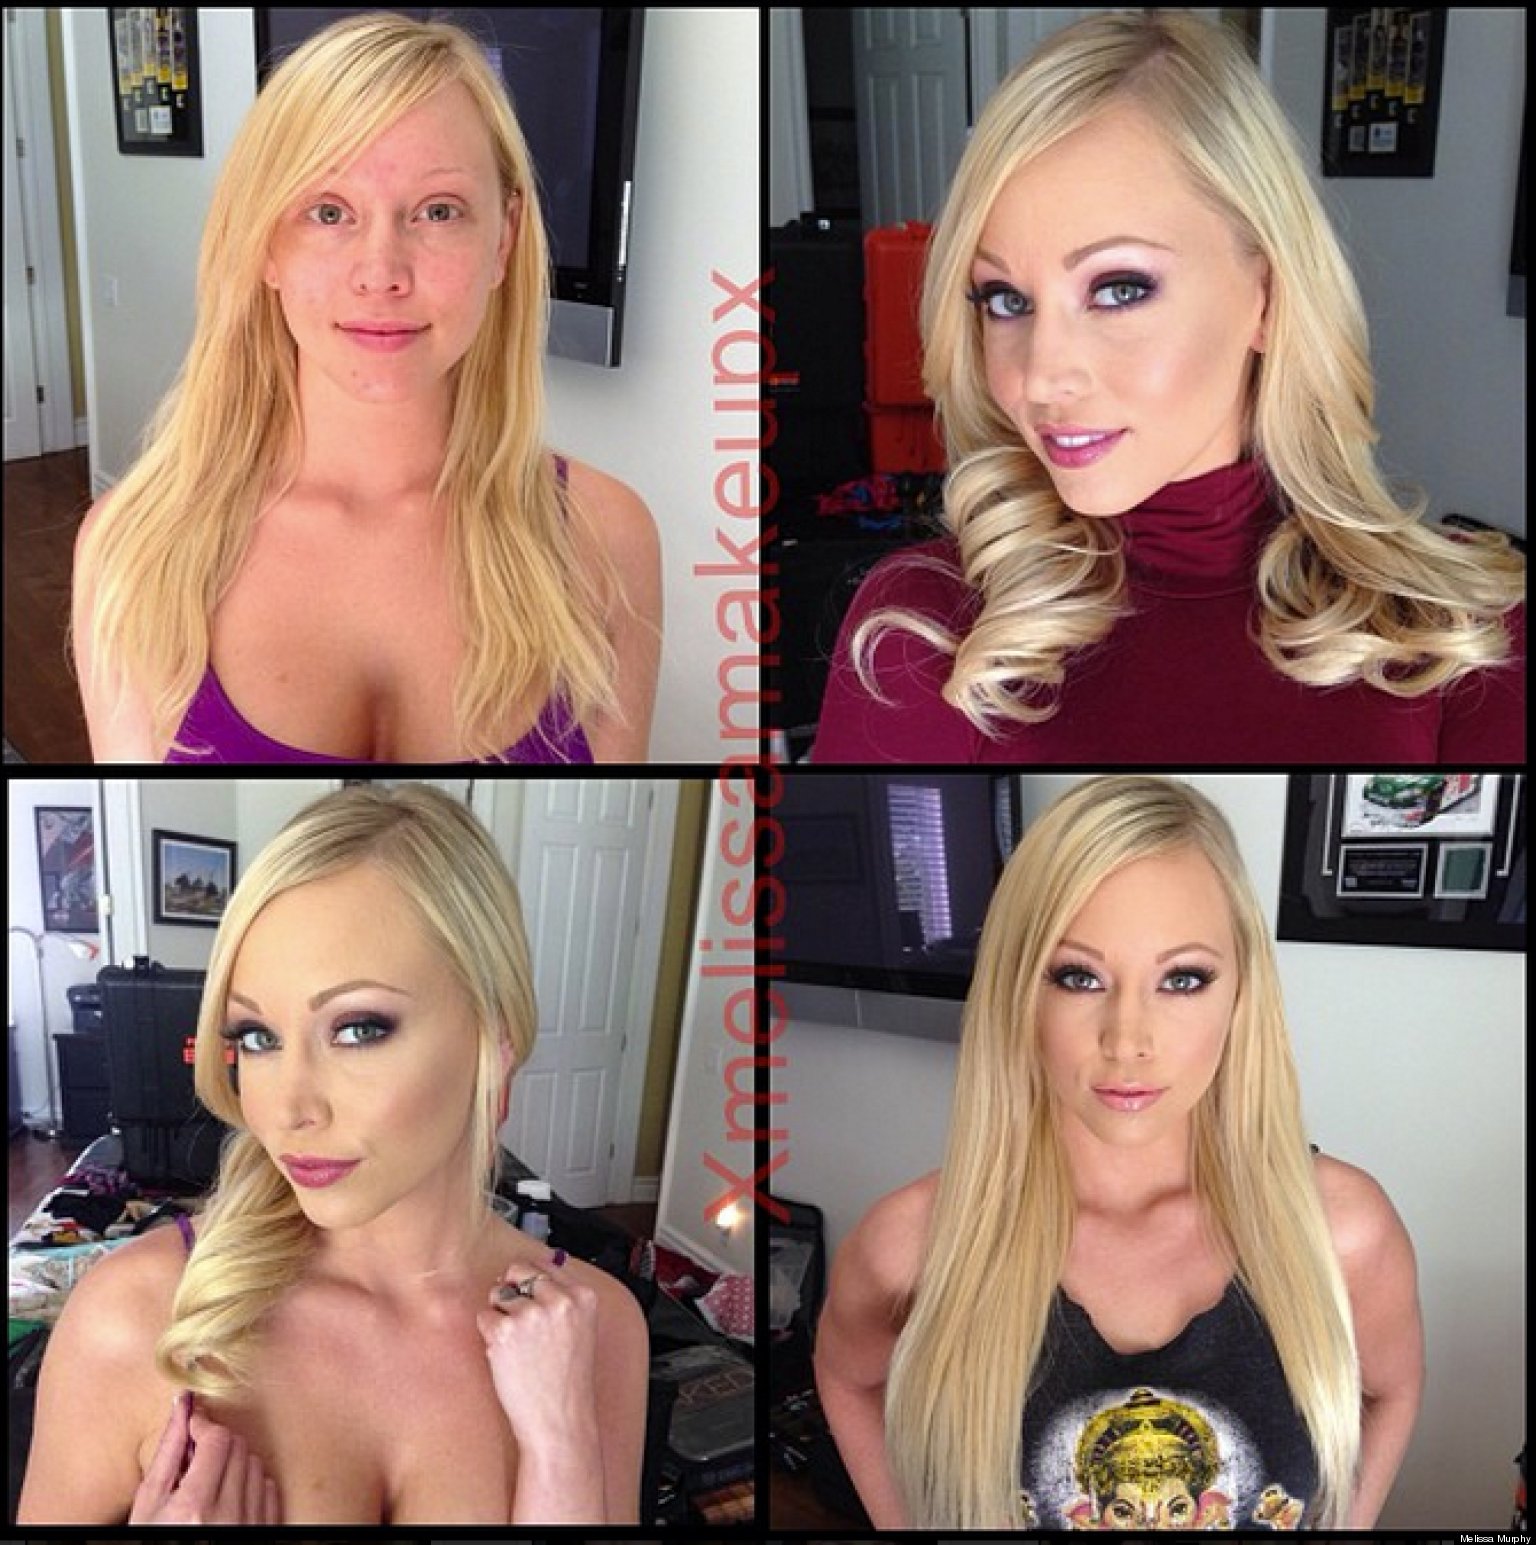 crazy world balls porn stars without makeup more before and after pictures melissa